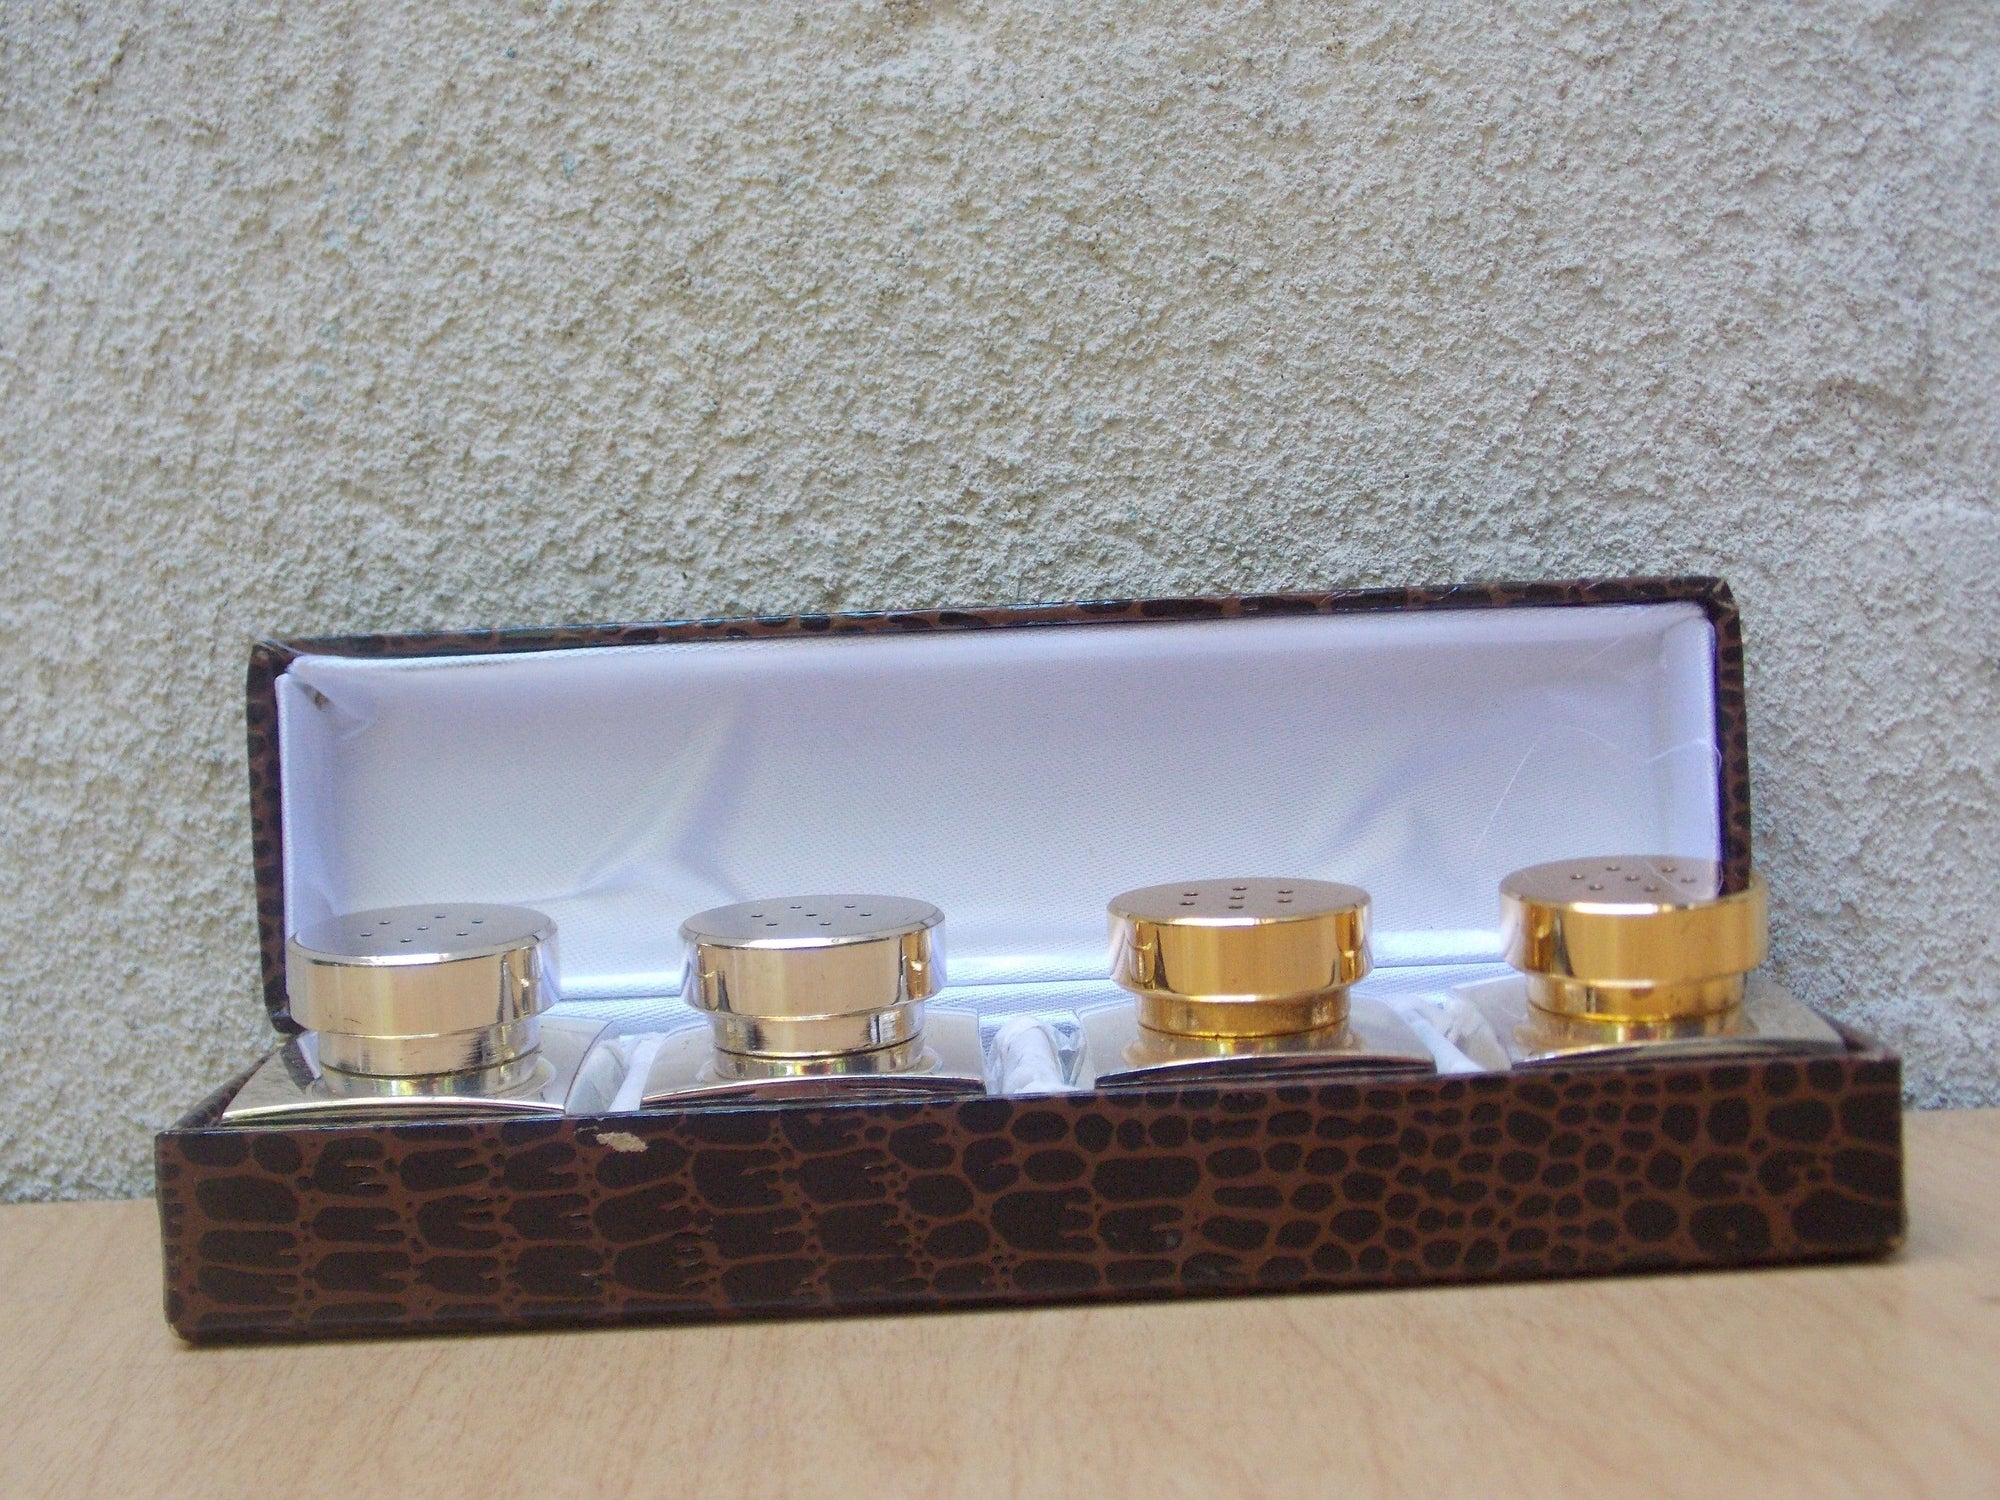 I Like Mike's Mid Century Modern Salt & Pepper Shakers Small Chromed Mixed Metals Salt & Pepper Shakers, Double Set in Box